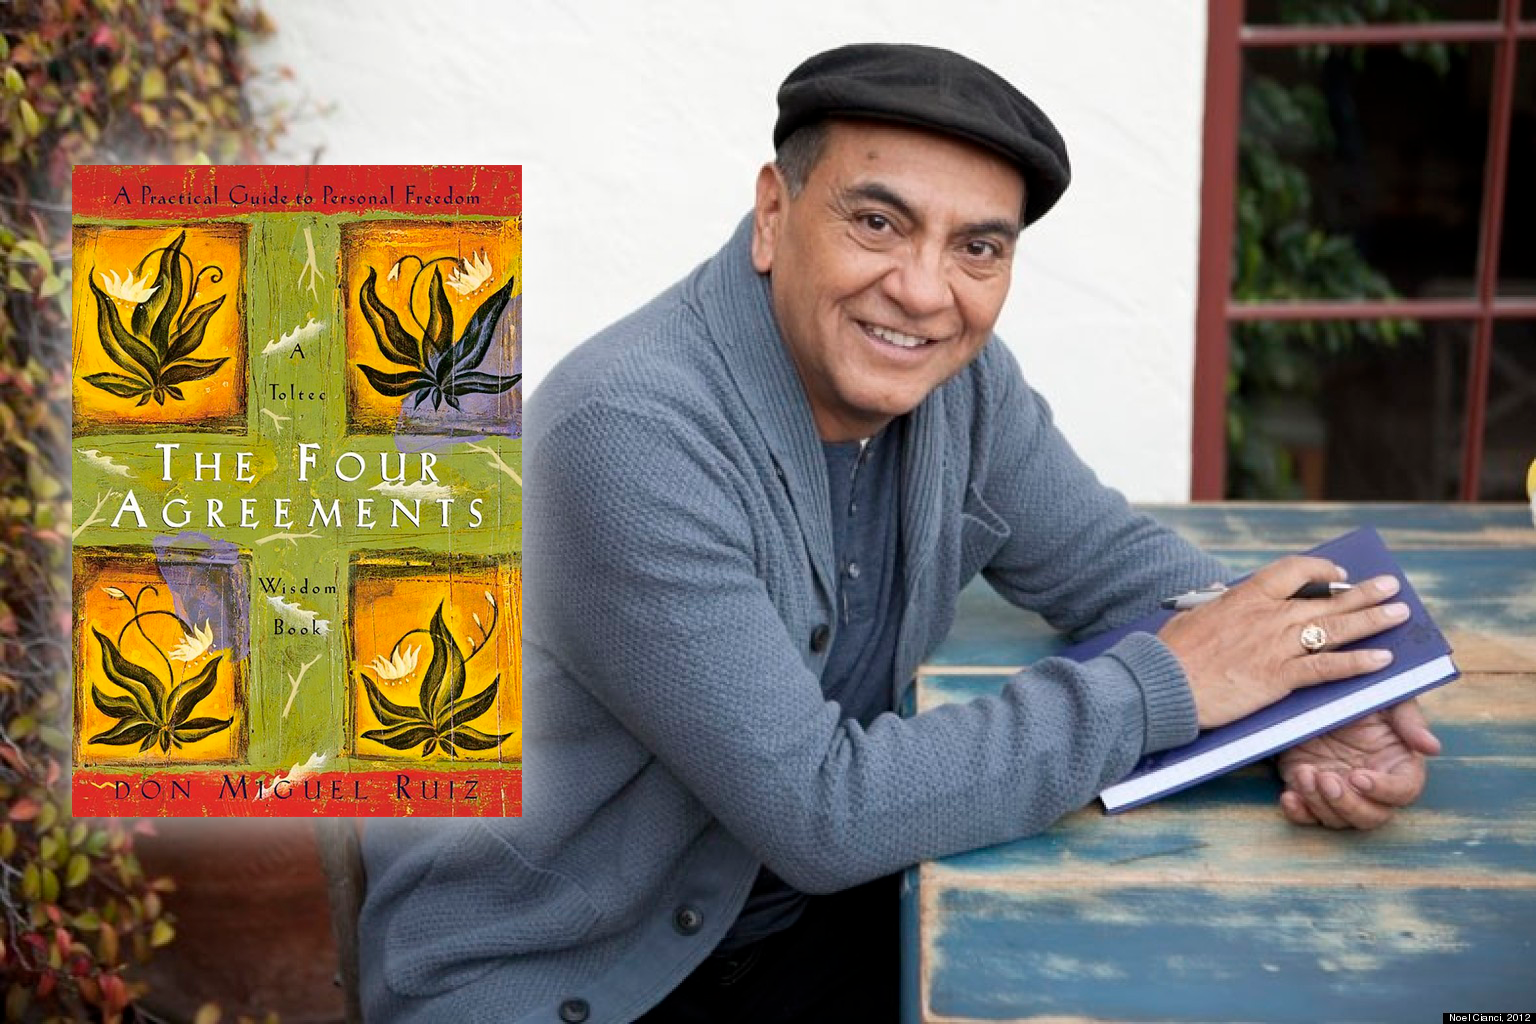 Don Miguel Ruiz, author of The Four Agreements, holding a pen and a hardcover book